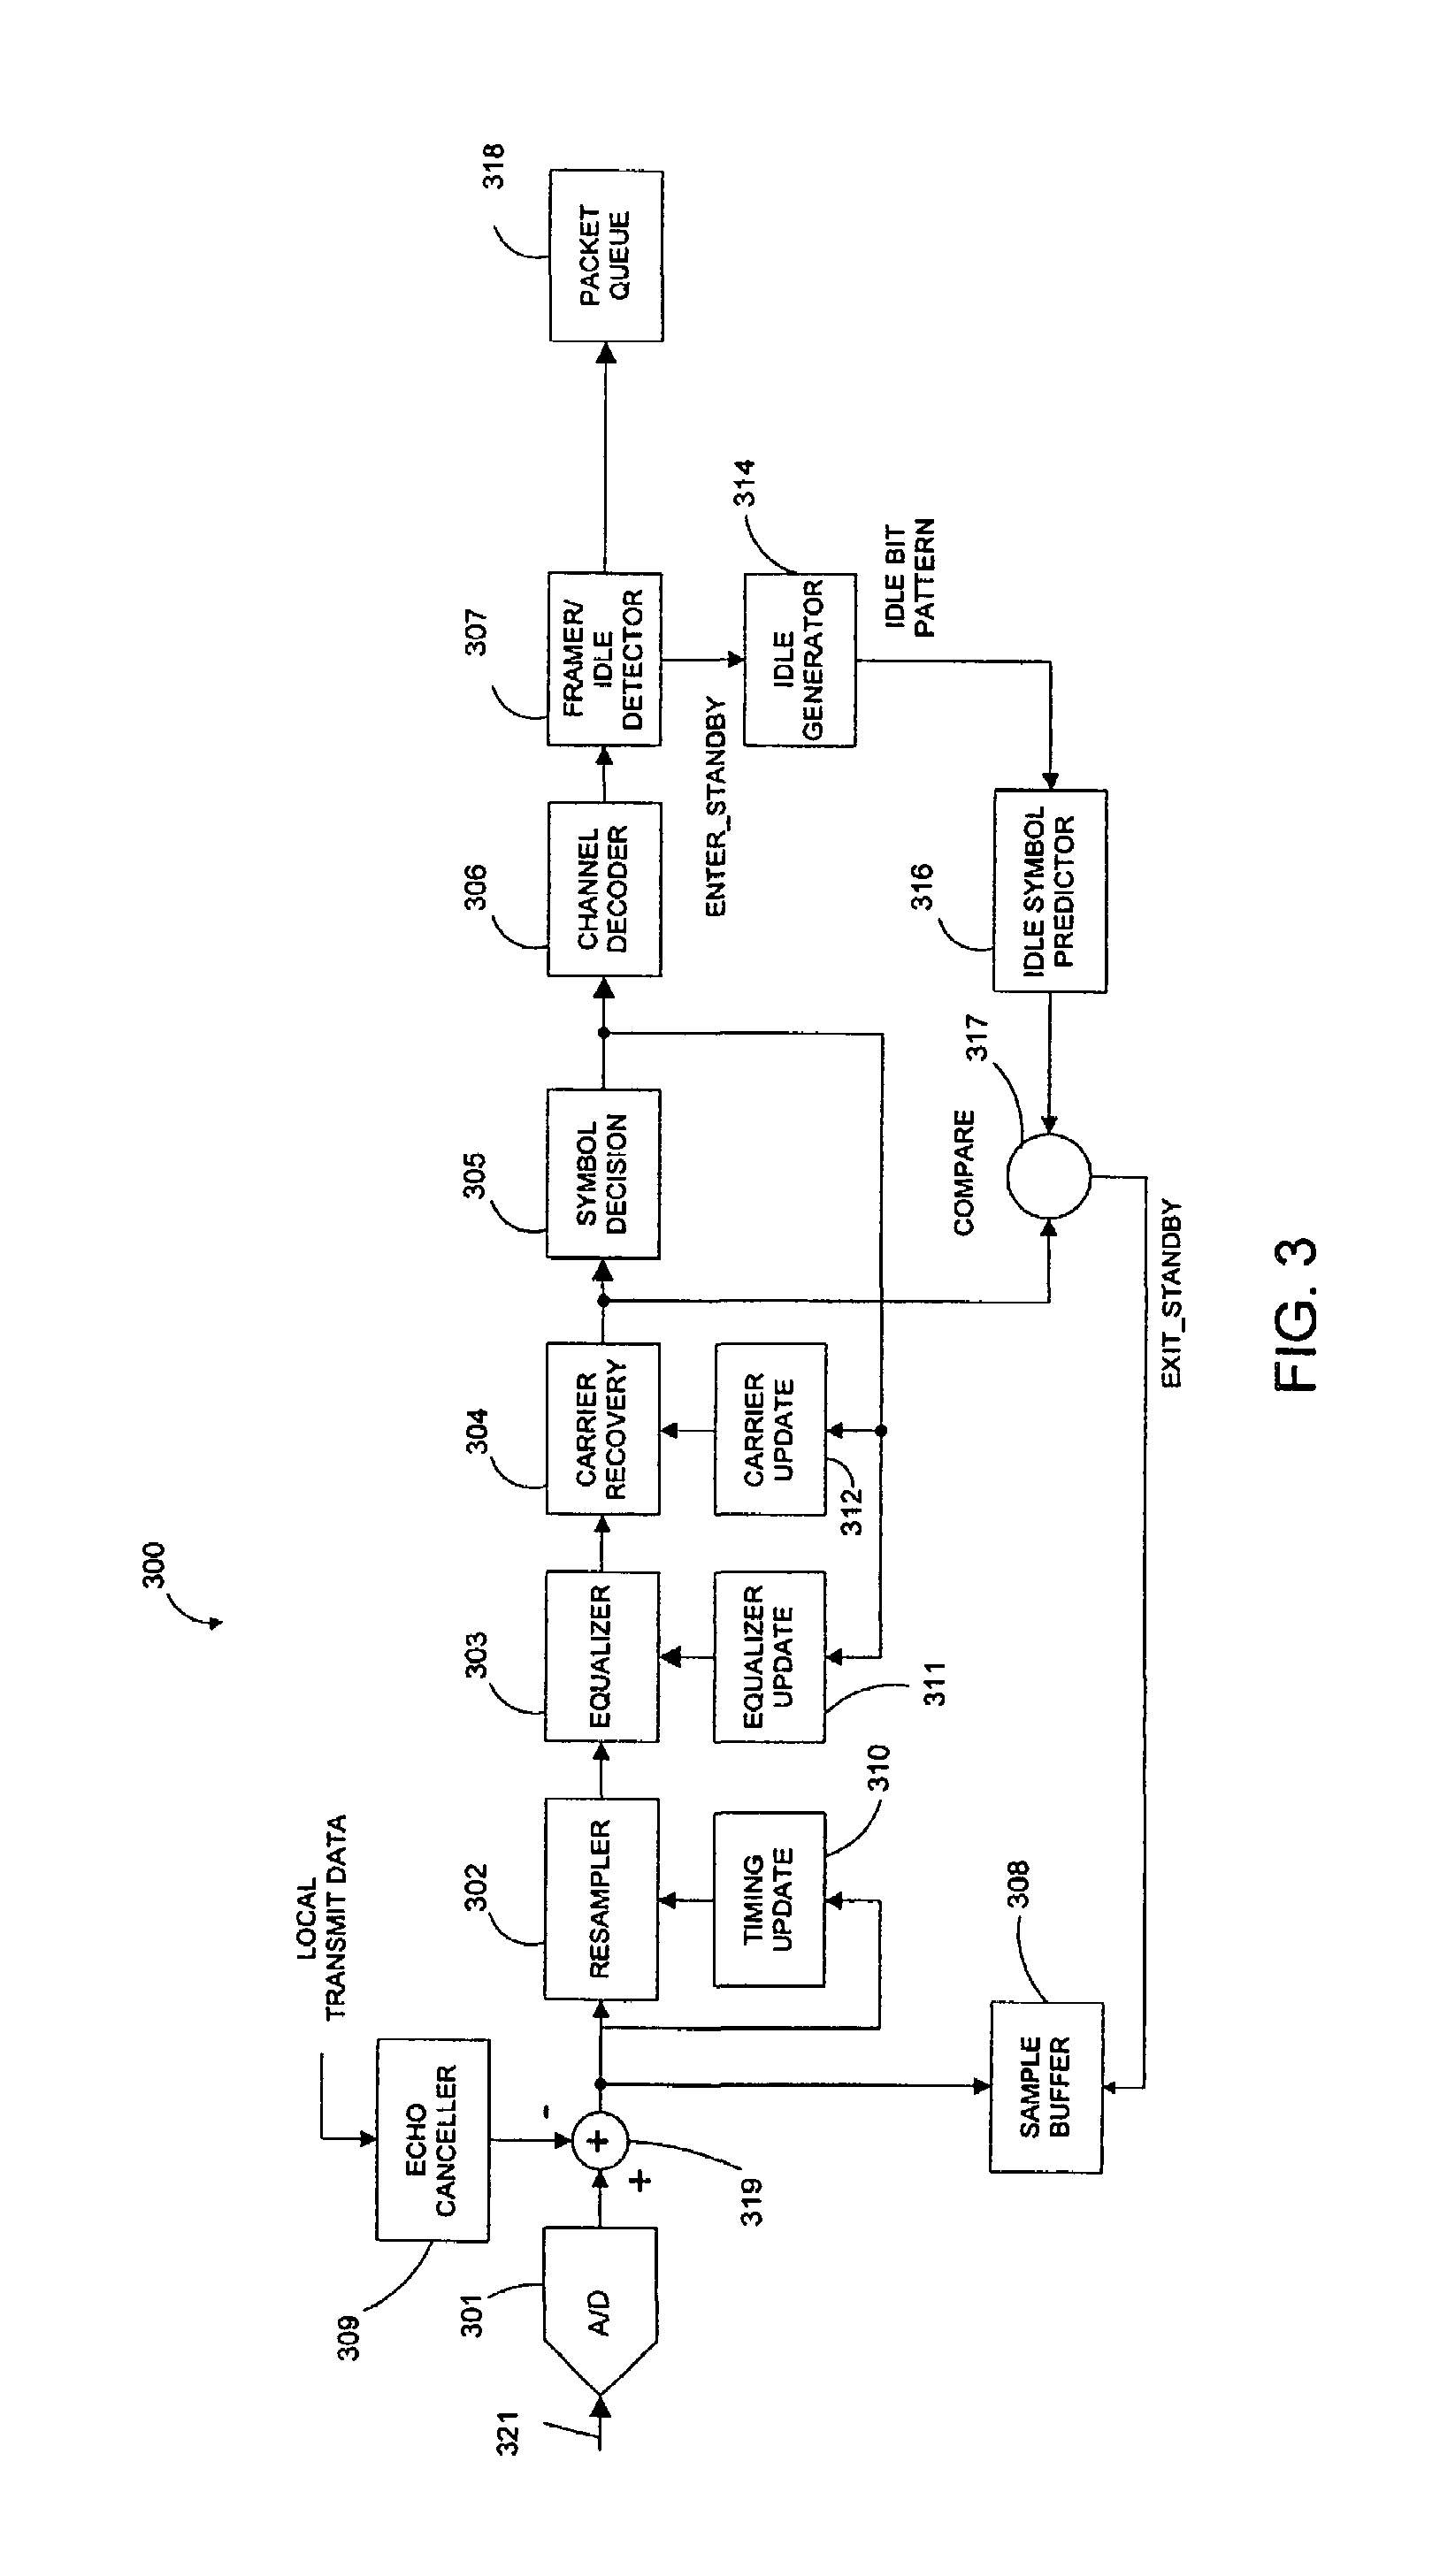 Method and apparatus for reducing signal processing requirements for transmitting packet-based data